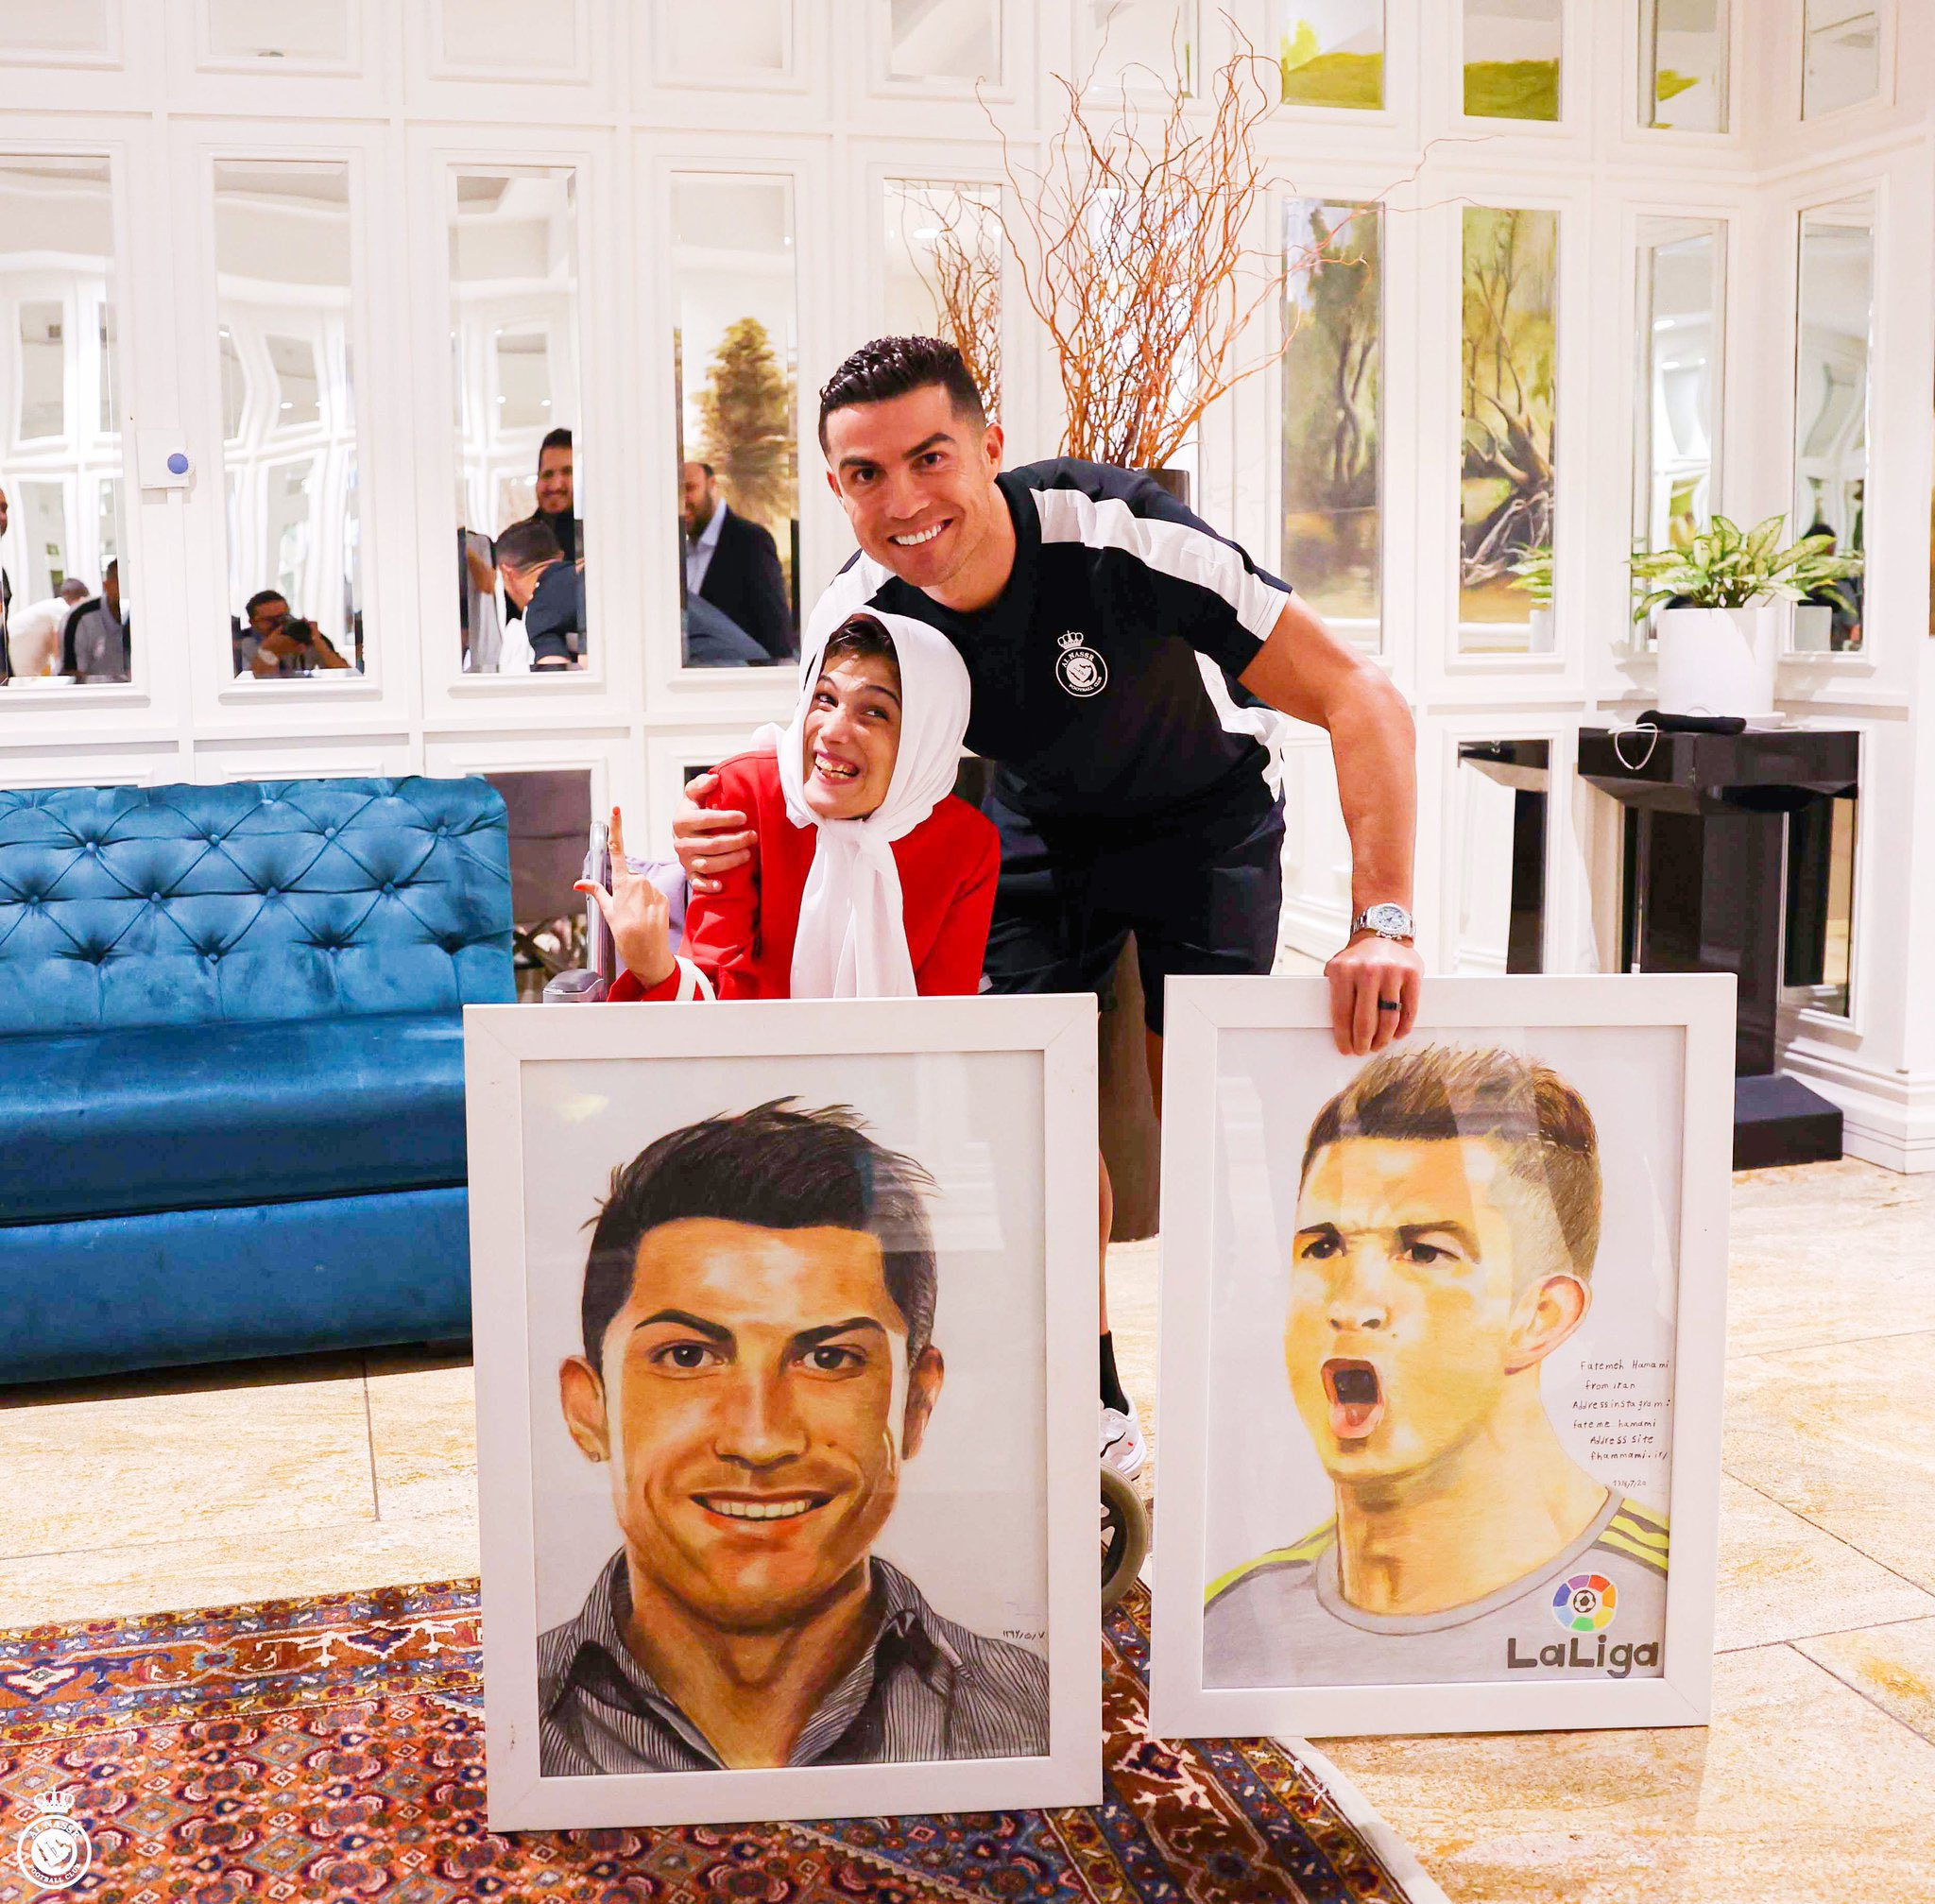 Fatemeh, a Talented Iranian Artist Who Paints Portraits with Her Feet, Has Always Dreamed of Meeting Cristiano Ronaldo